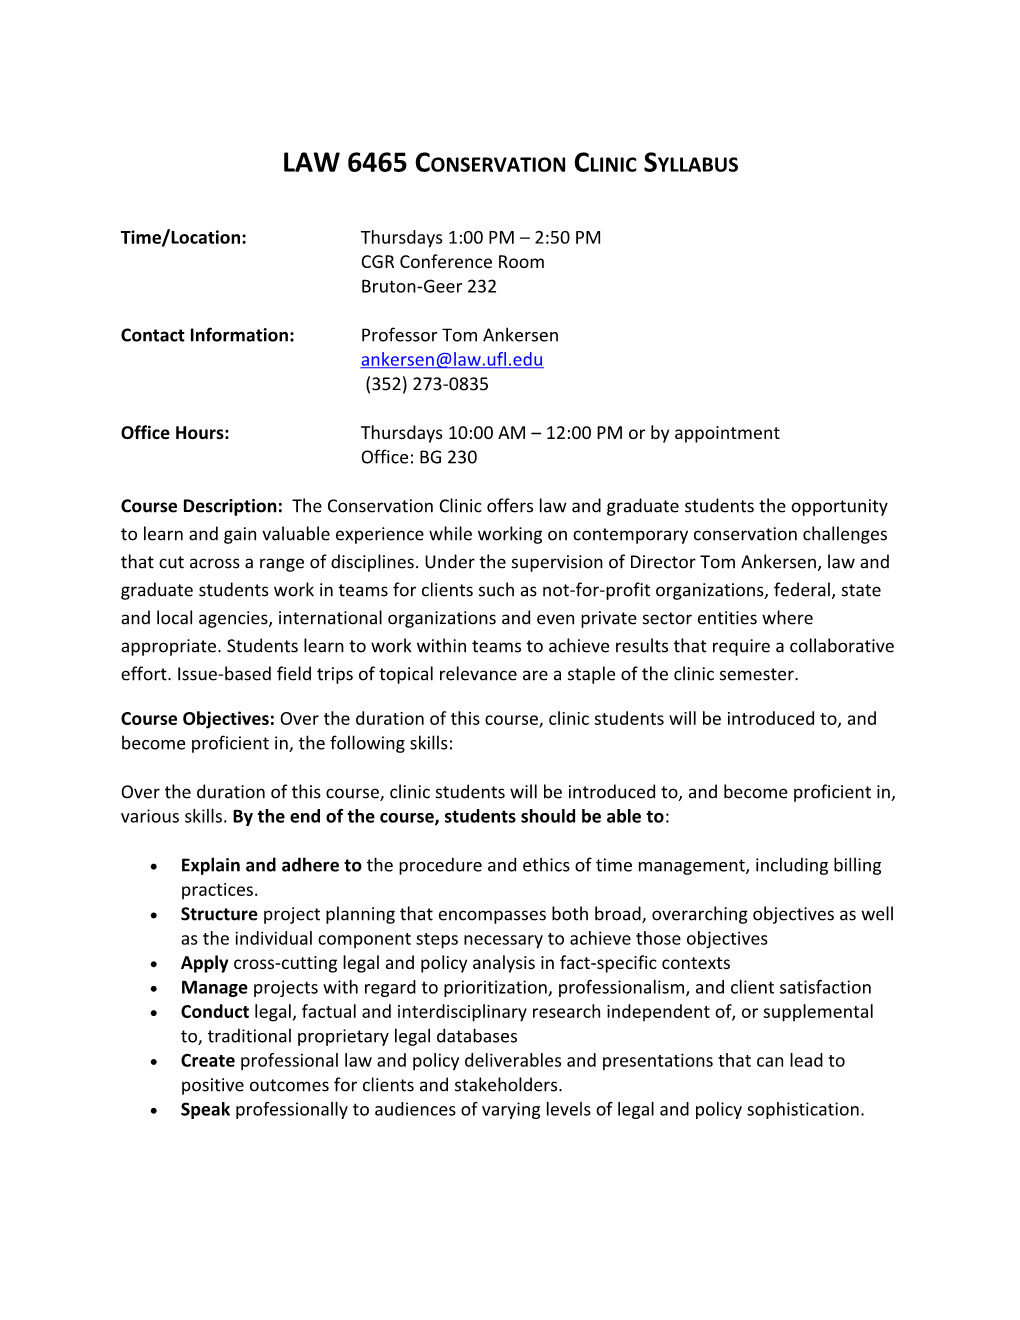 LAW 6465 Conservation Clinic Syllabus